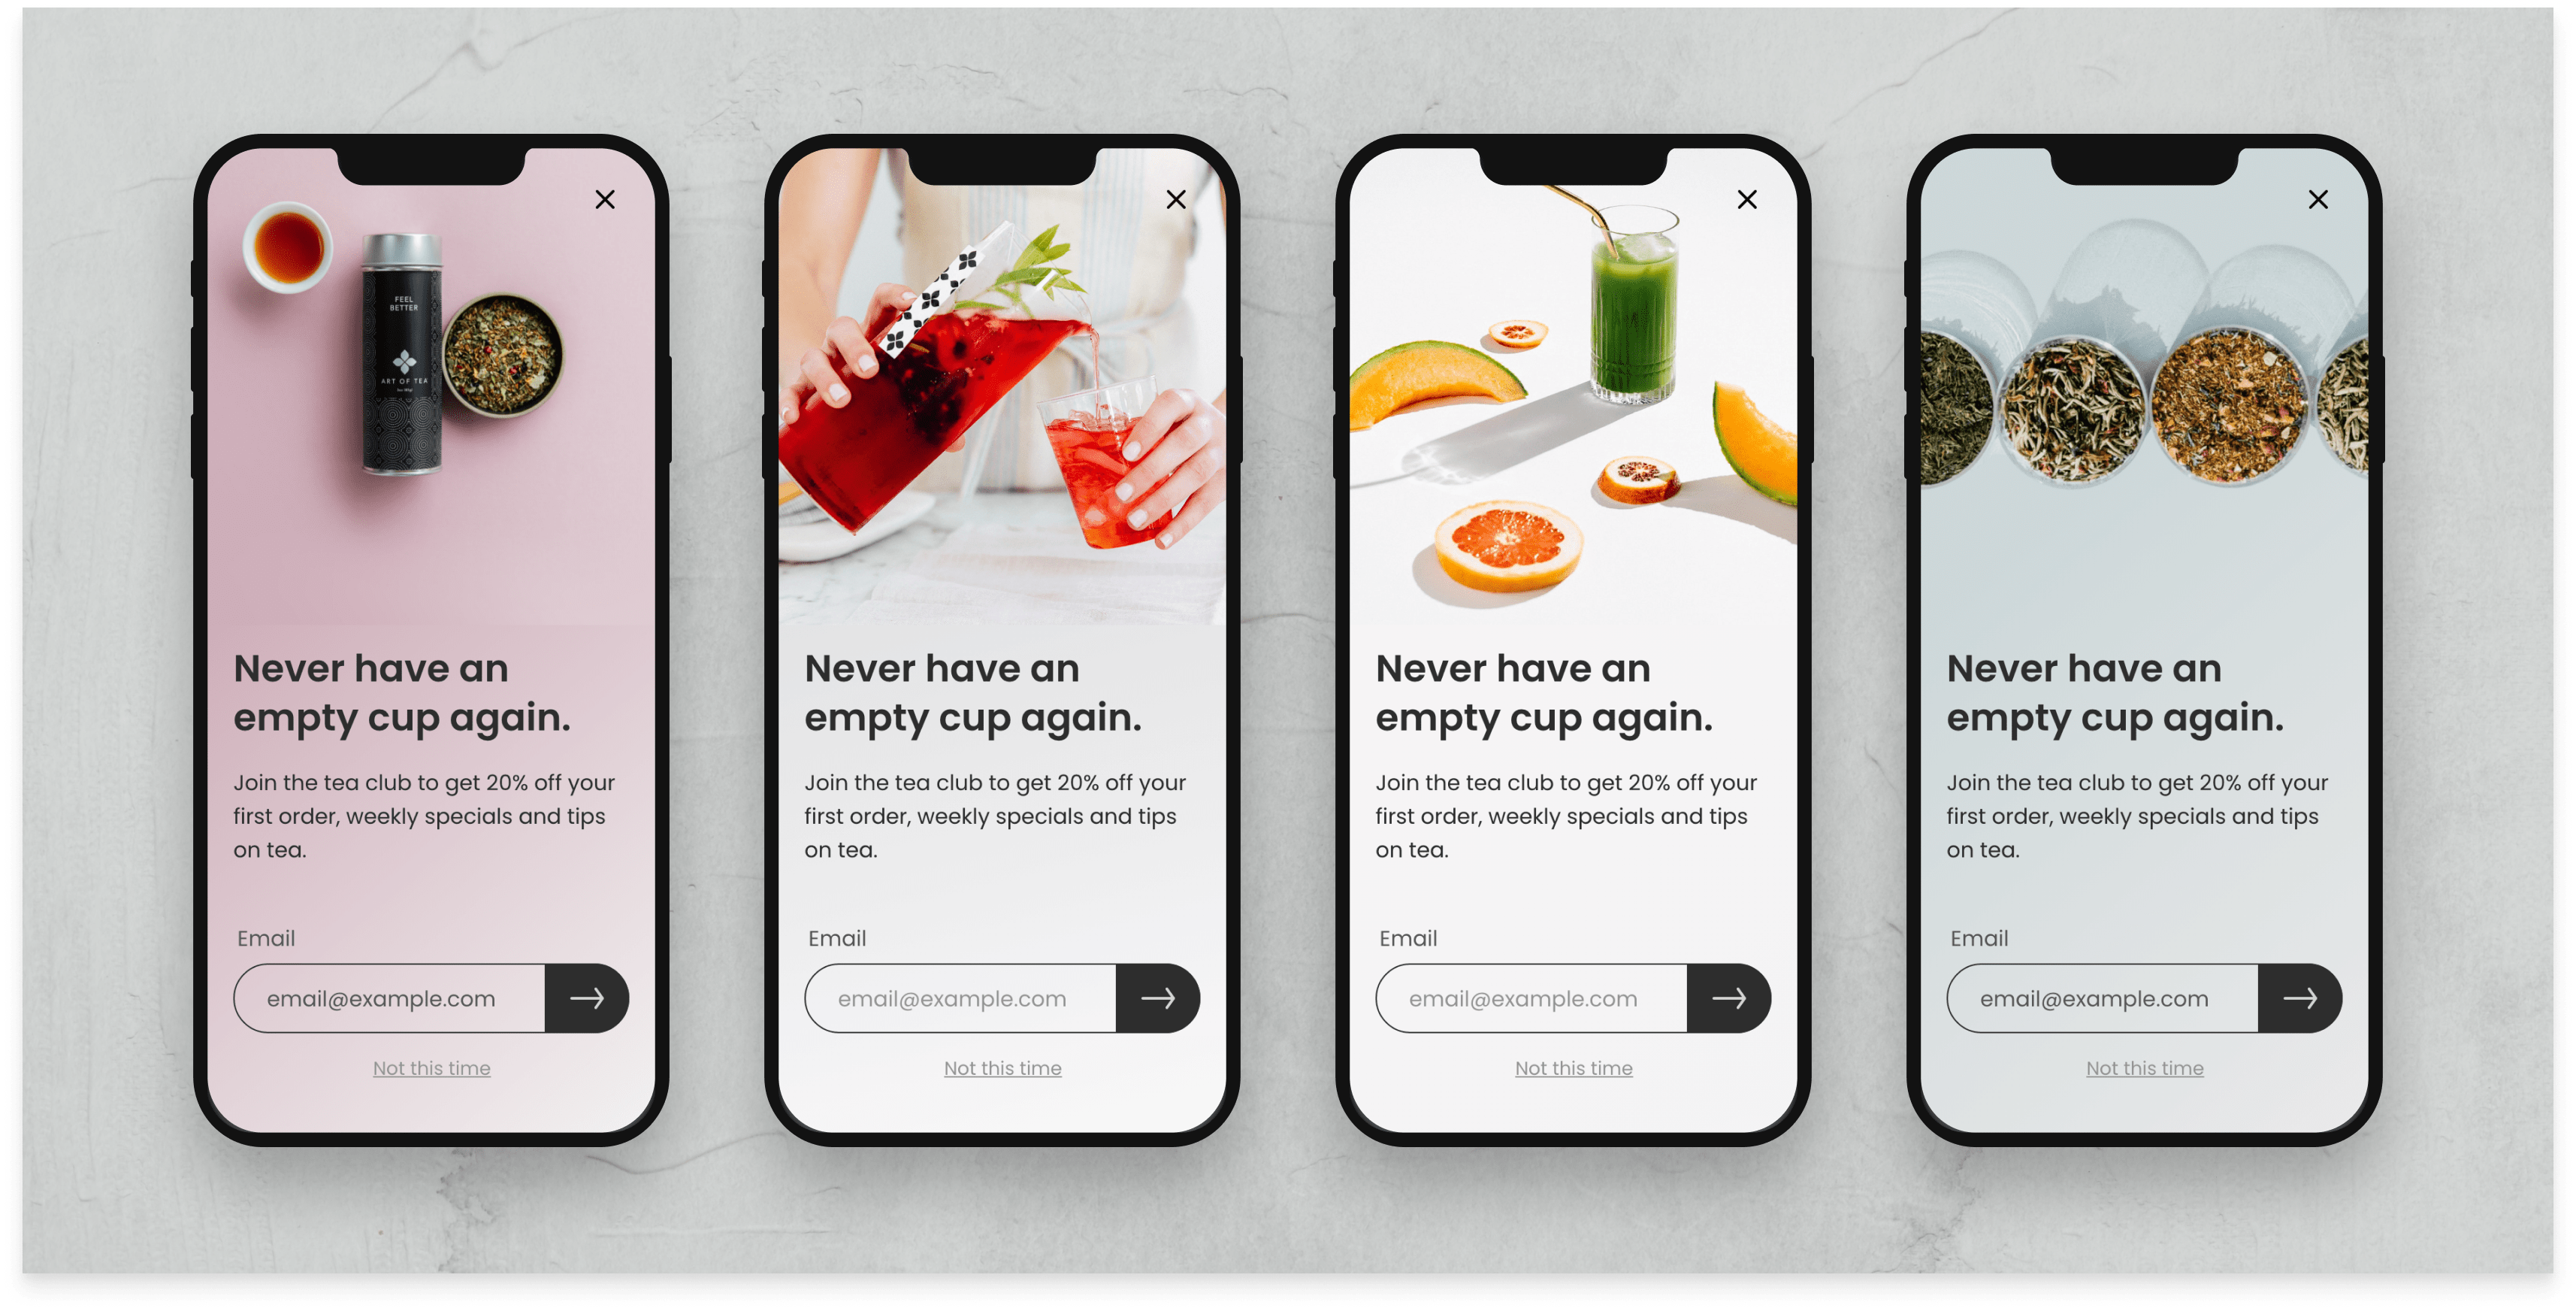 Mockups of different designs for the email capture of a tea company